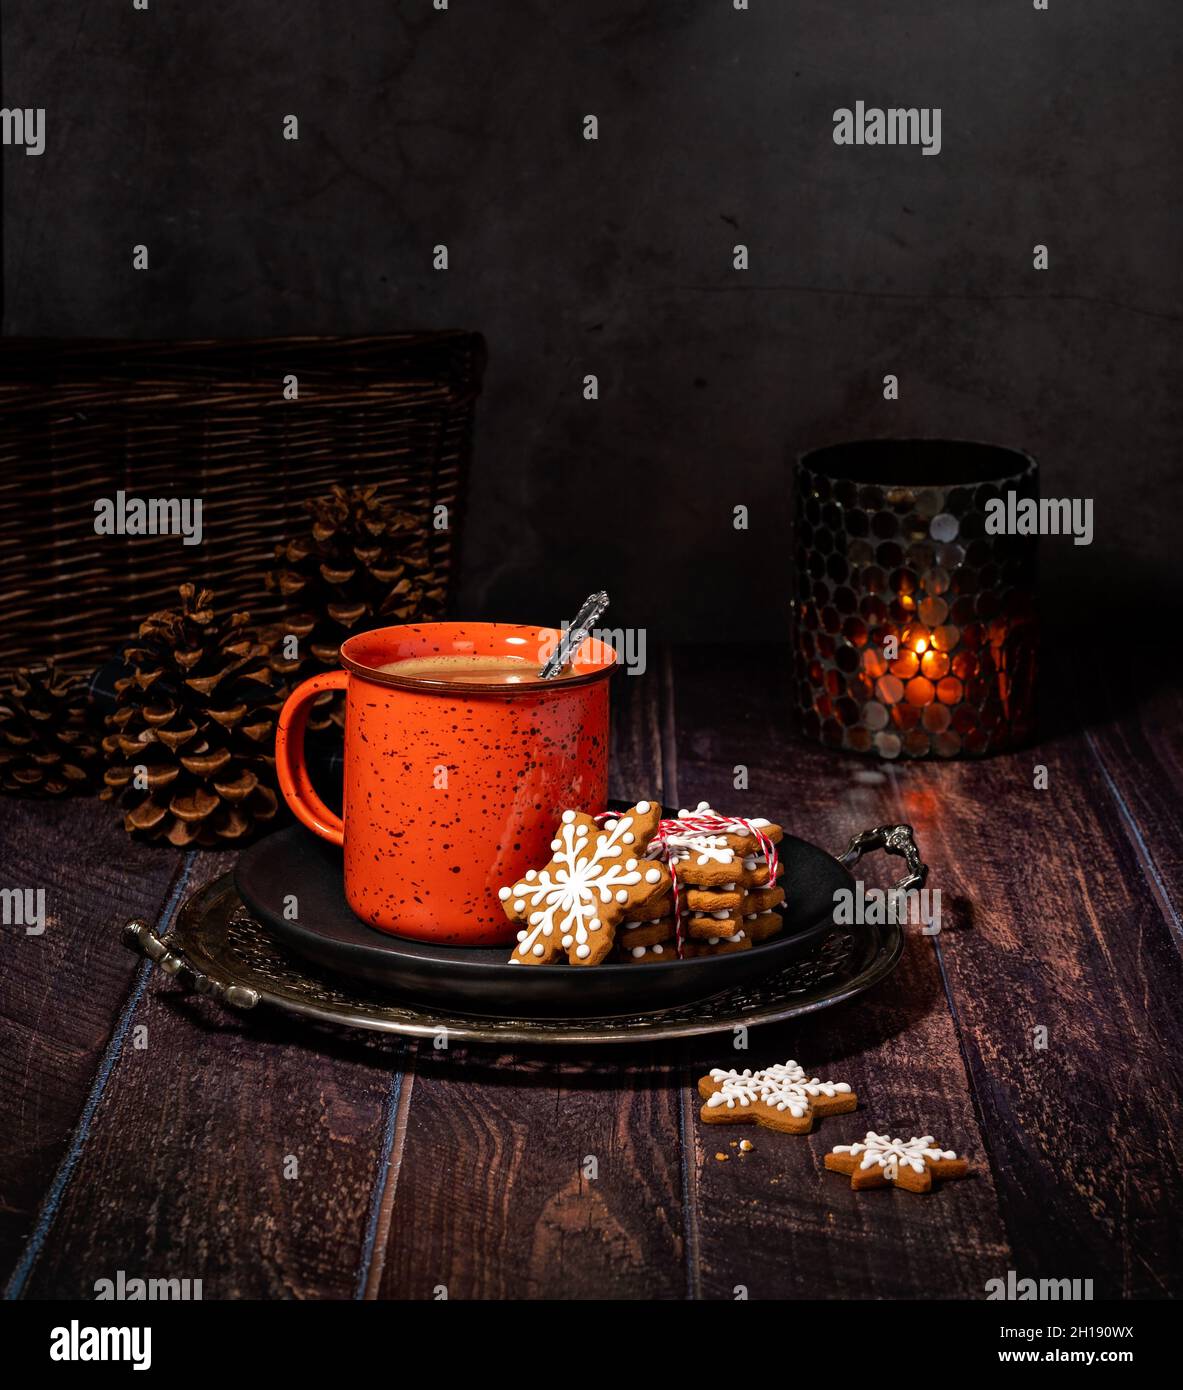 Homemade Hot Chocolate or Coffee in a Rustic Red Mug with Gingerbread Christmas Cookies on a plate as a cozy Winter treat. Stock Photo